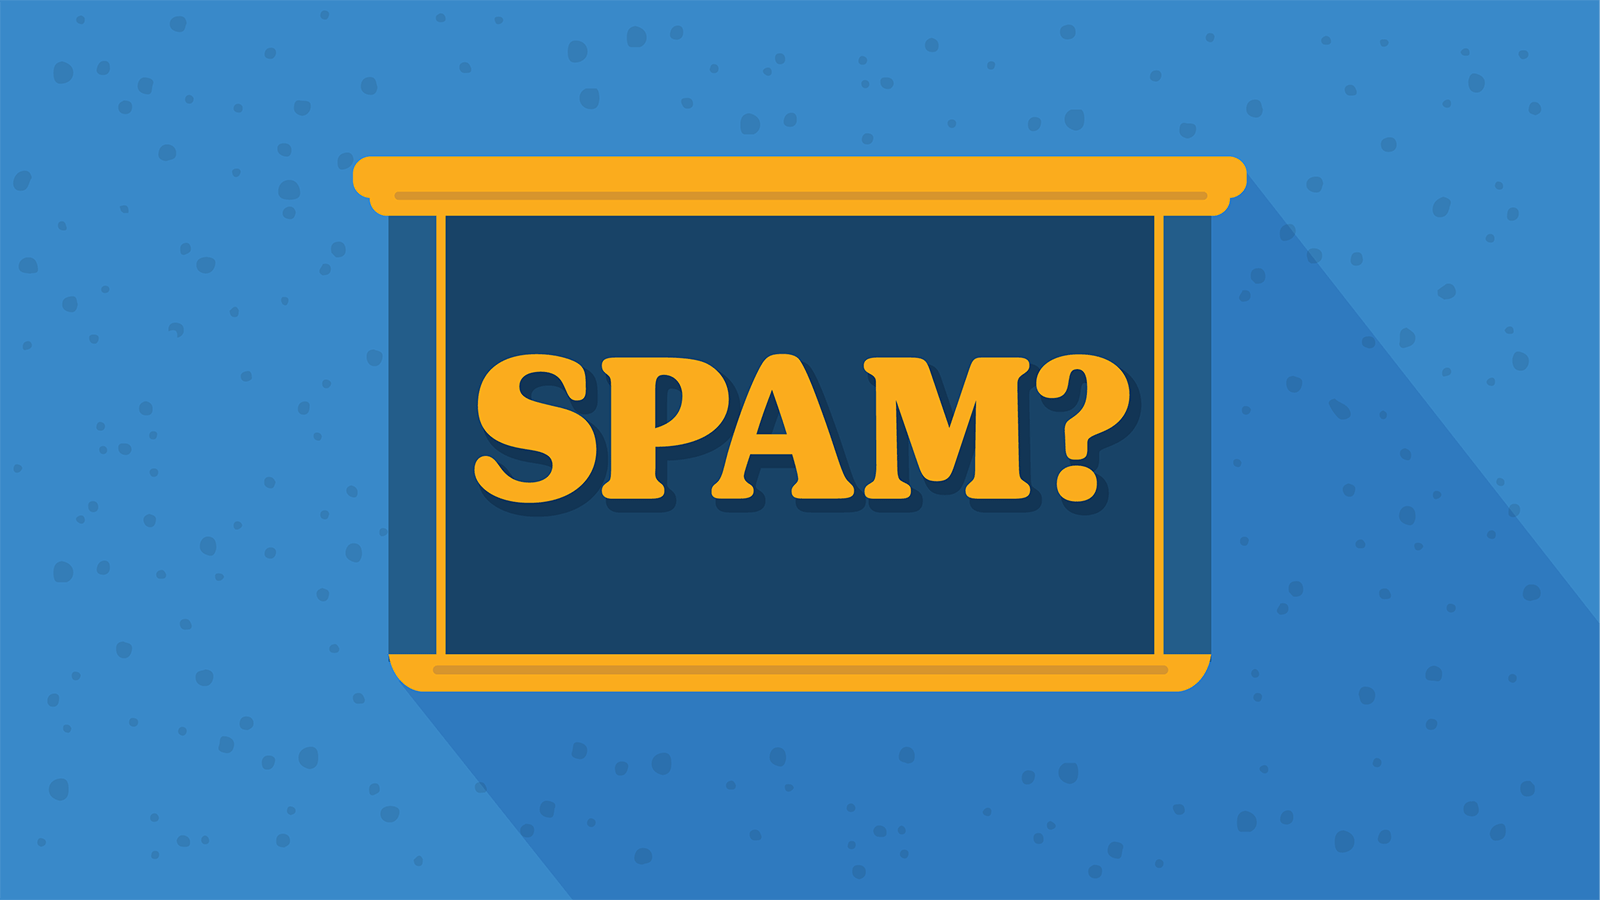 Spam container with a question mark